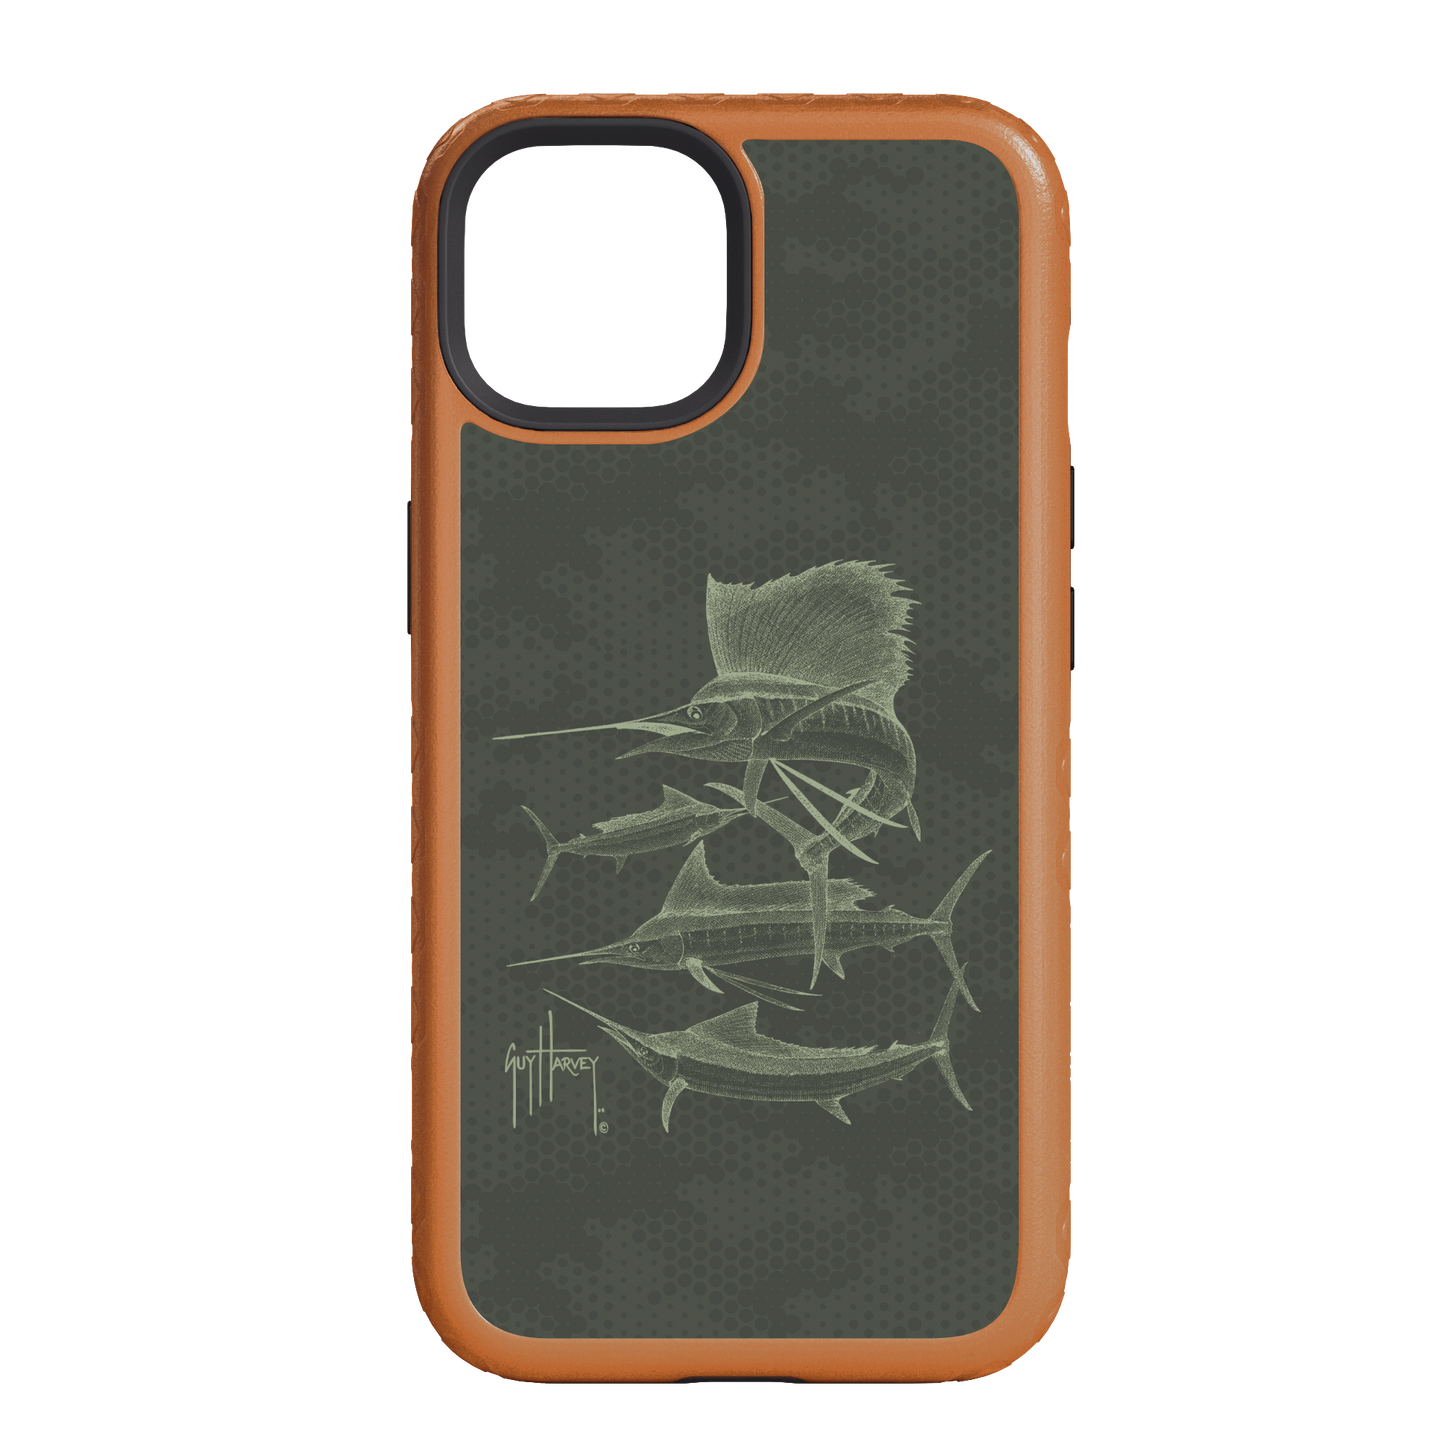 iPhone 14 Models - Fortitude Green Camo Phone Case